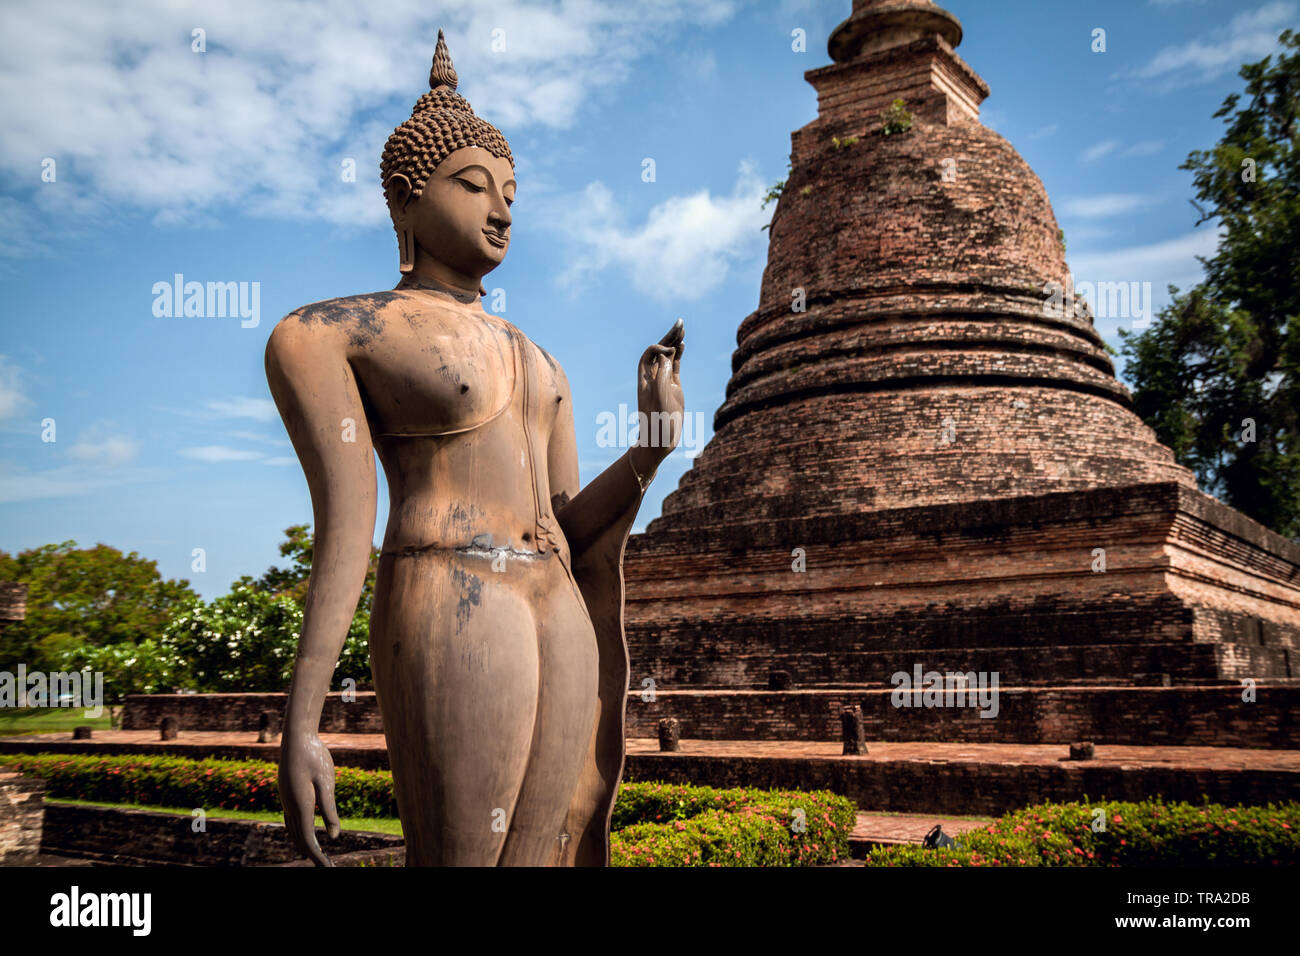 Buddhist Avatar statue with Mudra pose surrounded by flowers and an Ancient Buddhist Pagoda at the Sukhothai Historical Park in Thailand. Thai Buddhas Stock Photo